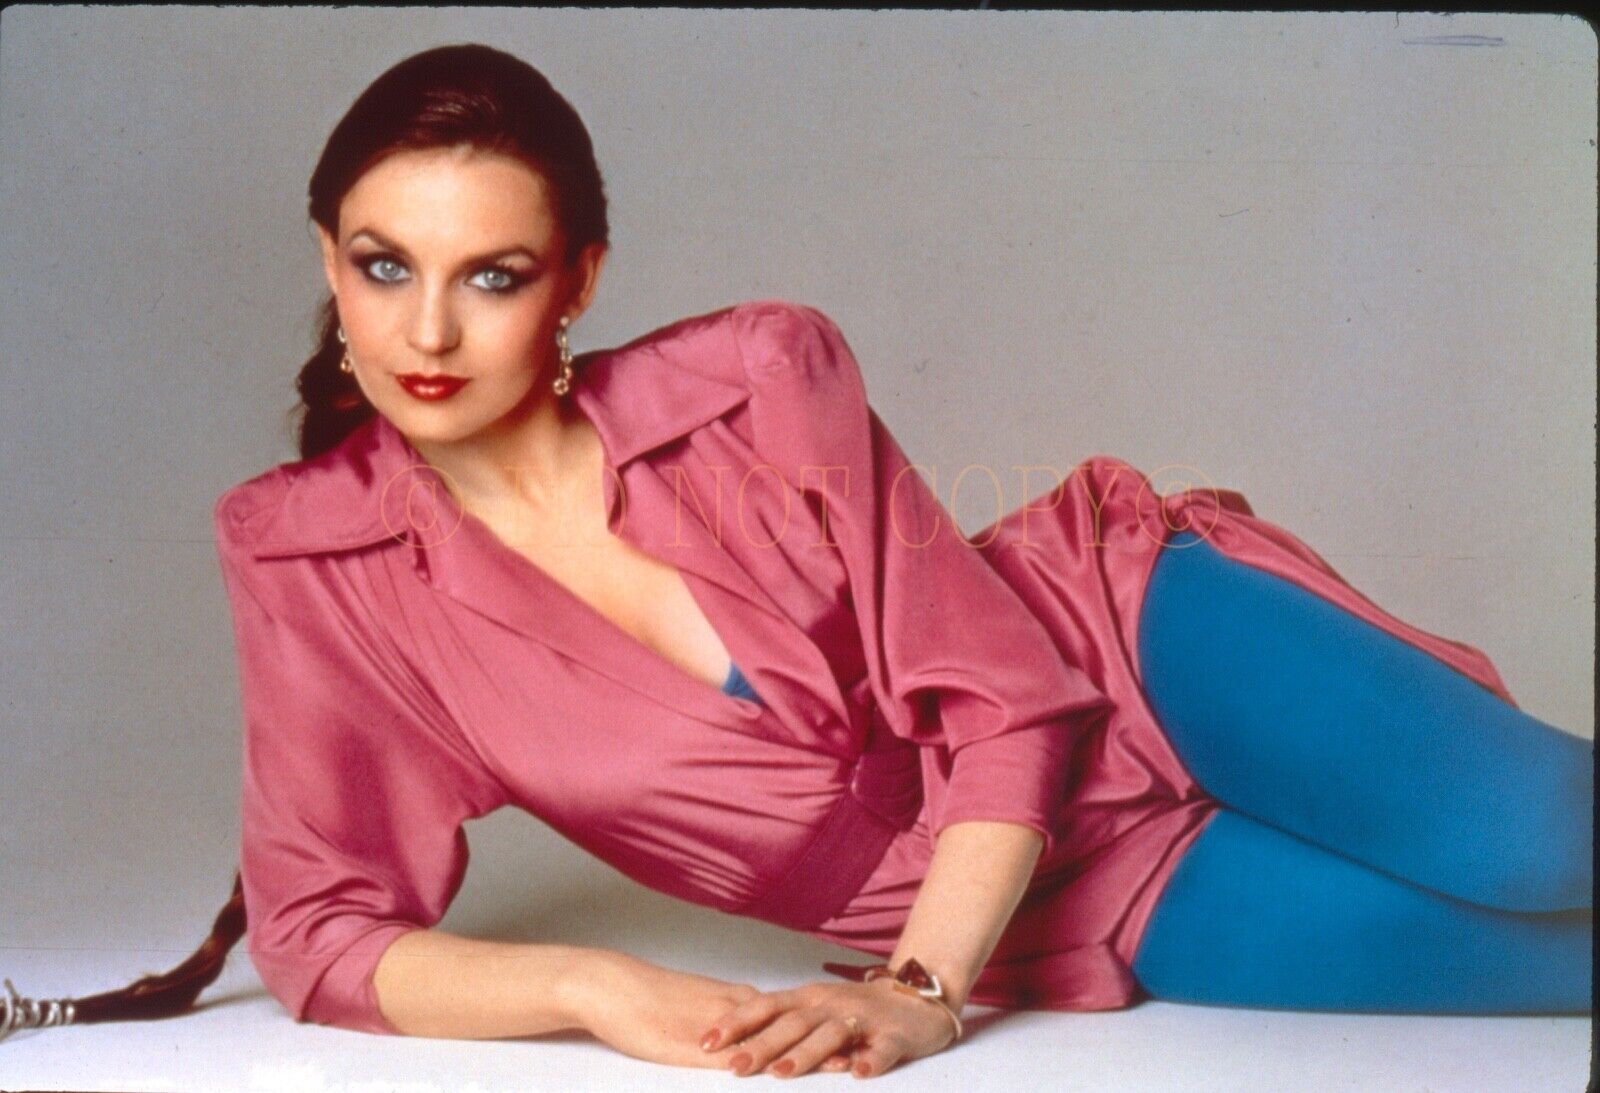 Original 35mm slide Chrystal Gayle. From the Miss the Mississippi photoshoot